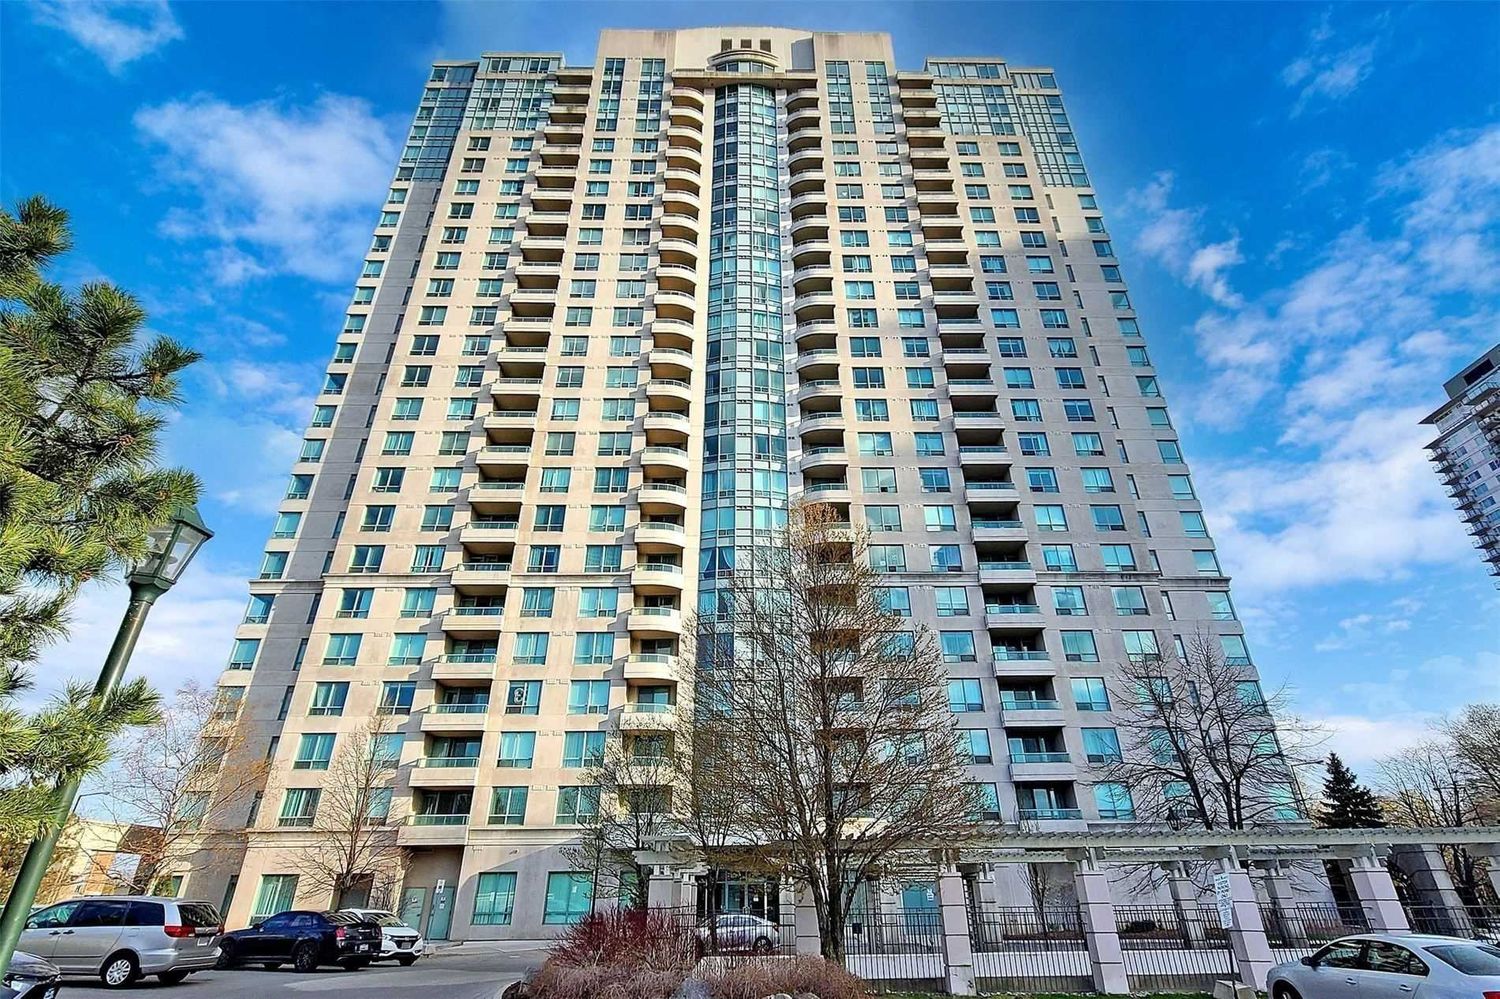 61 Town Centre Court. Forest Vista Condos is located in  Scarborough, Toronto